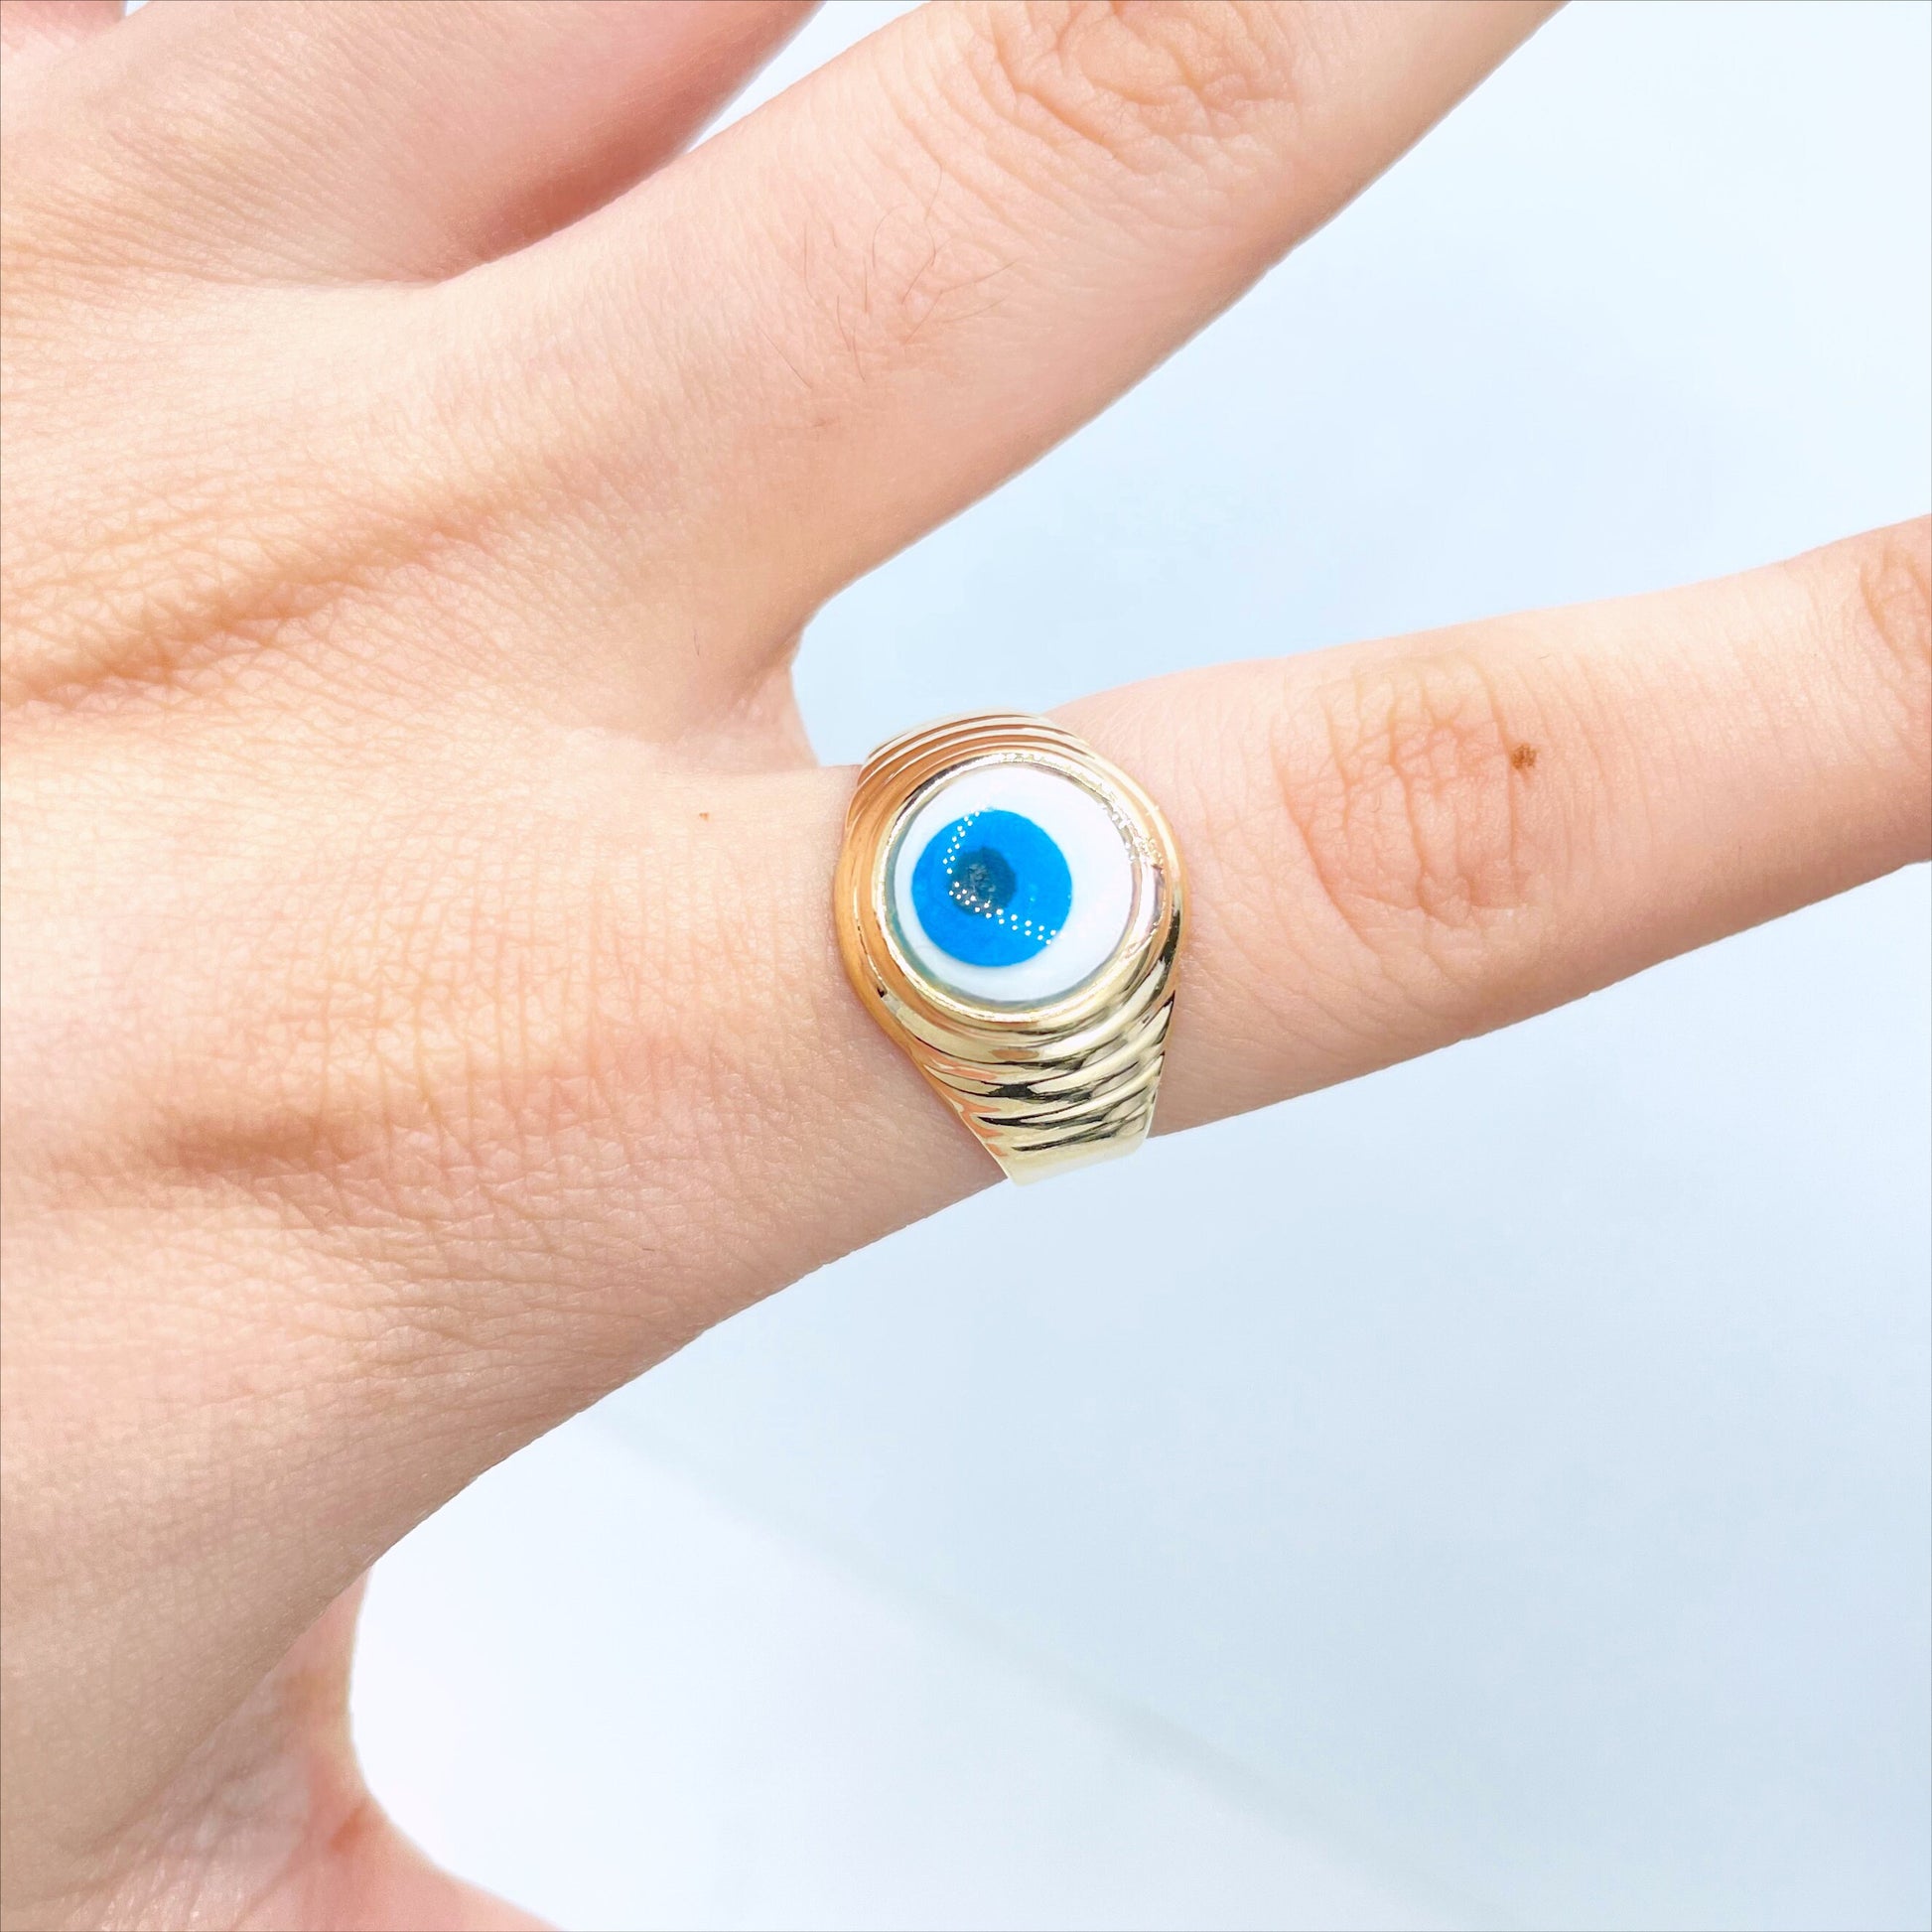 18k Gold Filled Texturized Blue Evil Eye, Greek Eyes Ring, Lucky & Protection Ring, Wholesale Jewelry Making Supplies